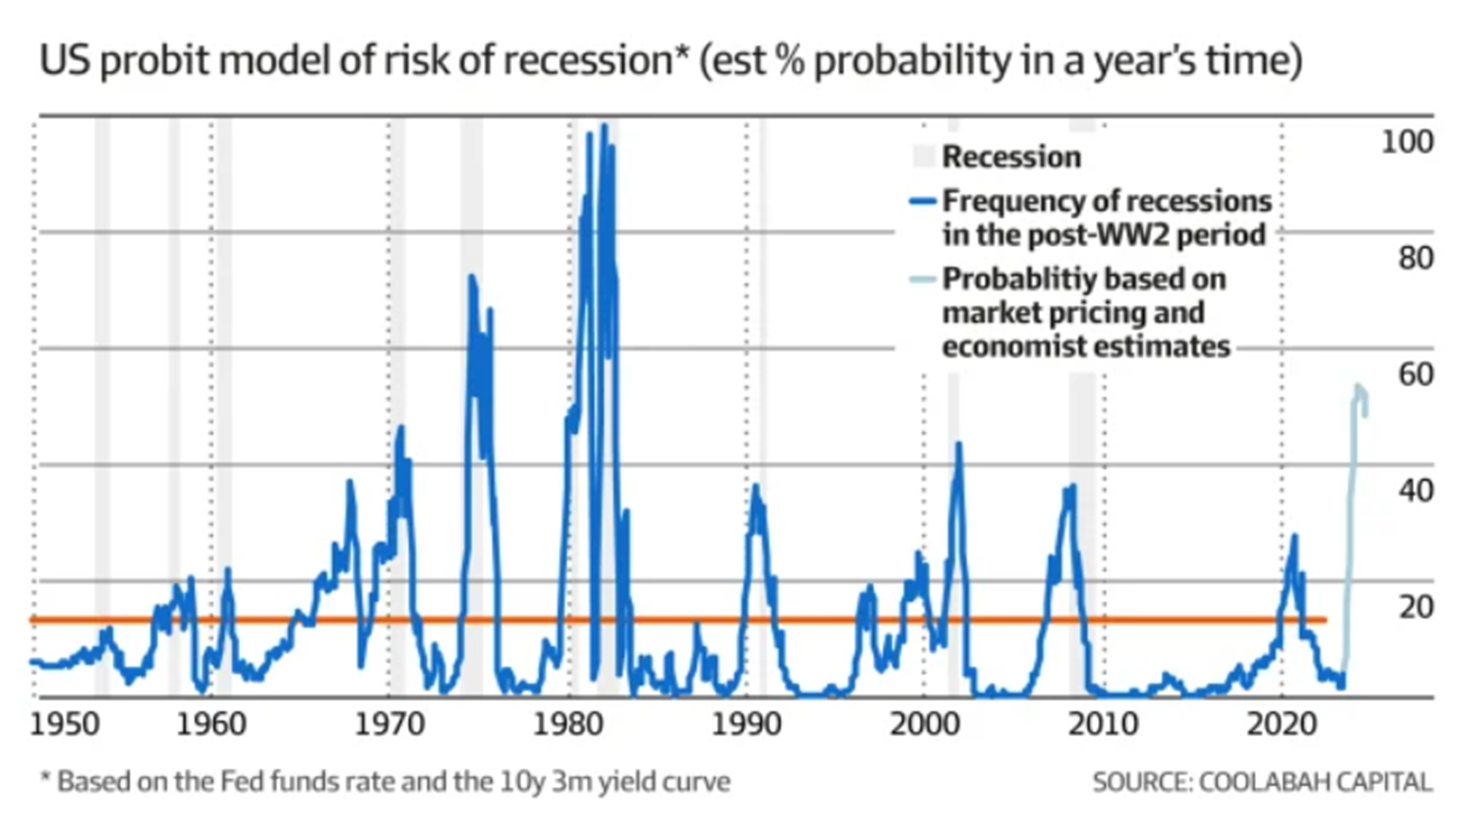 Since early this year our models have forecast a US recession